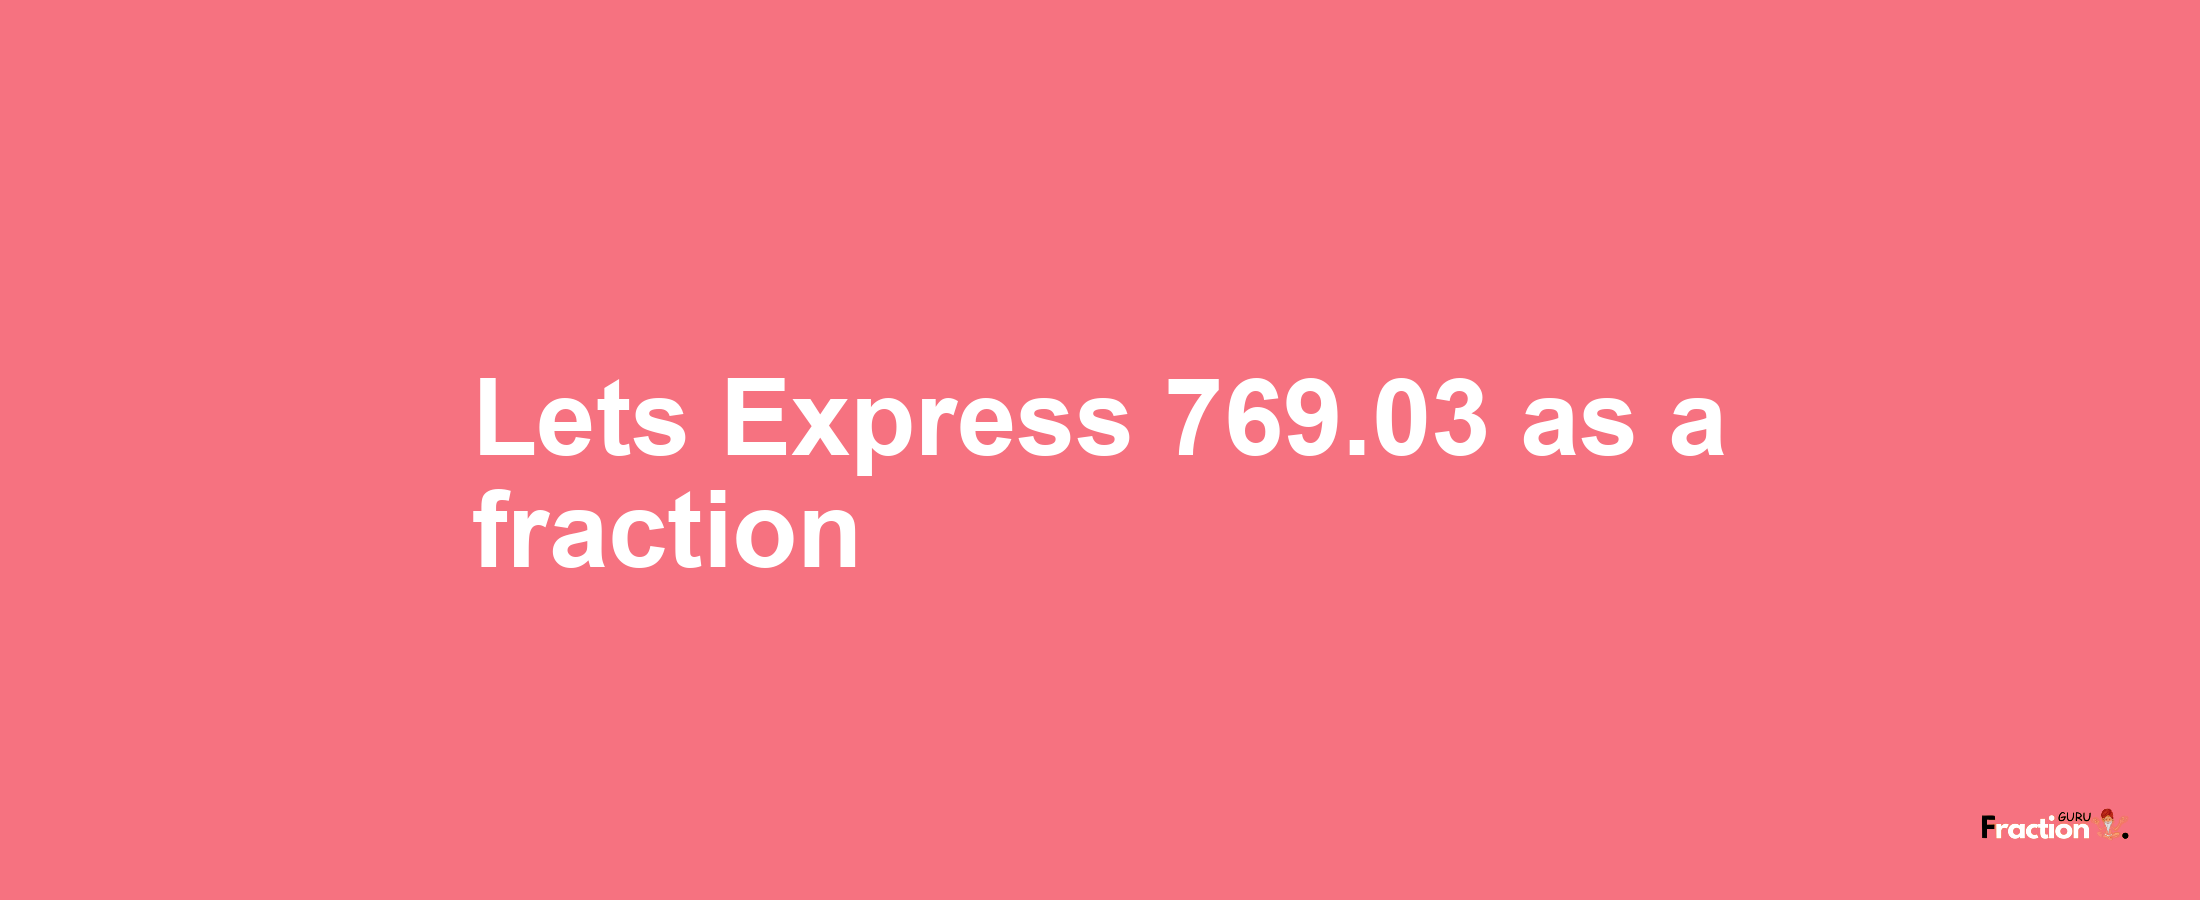 Lets Express 769.03 as afraction